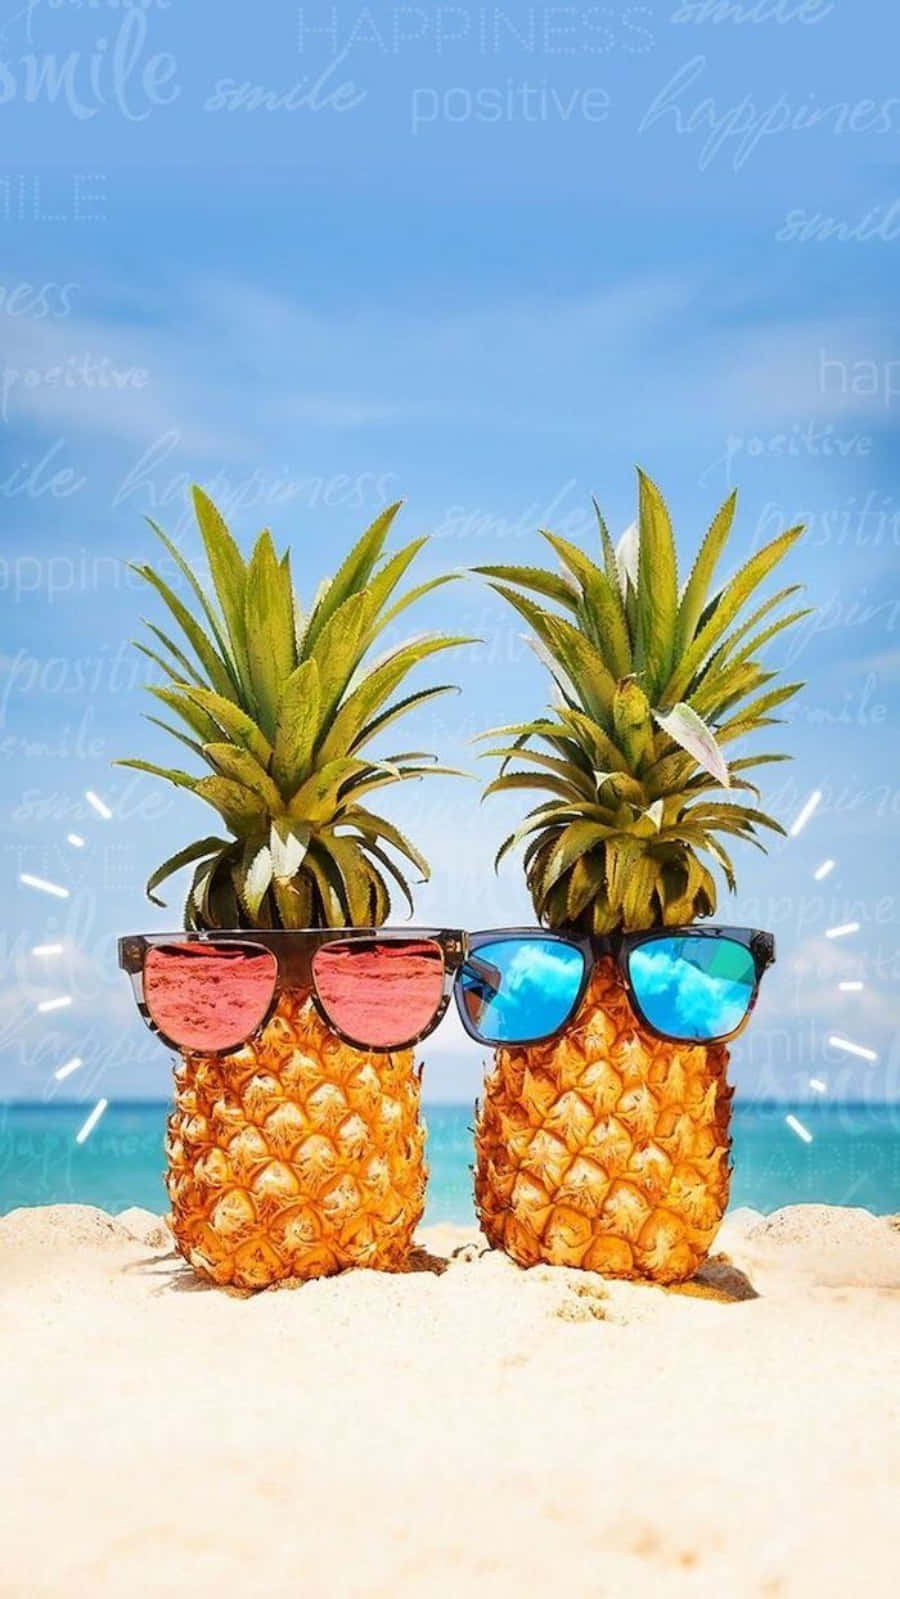 Two Pineapples Wearing Sunglasses On The Beach